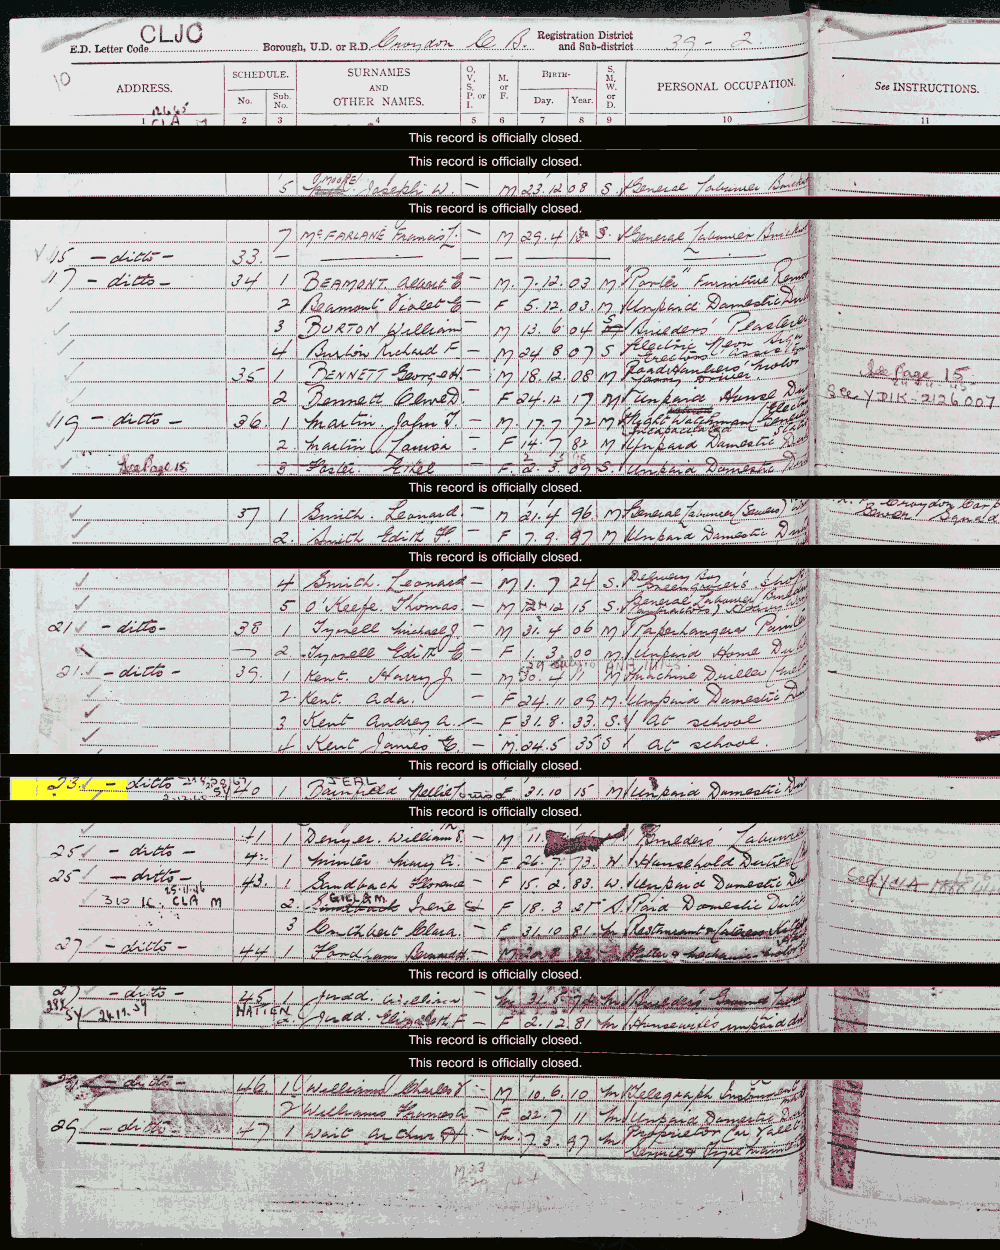 1939 census returns for Nellie Louise Barnfield